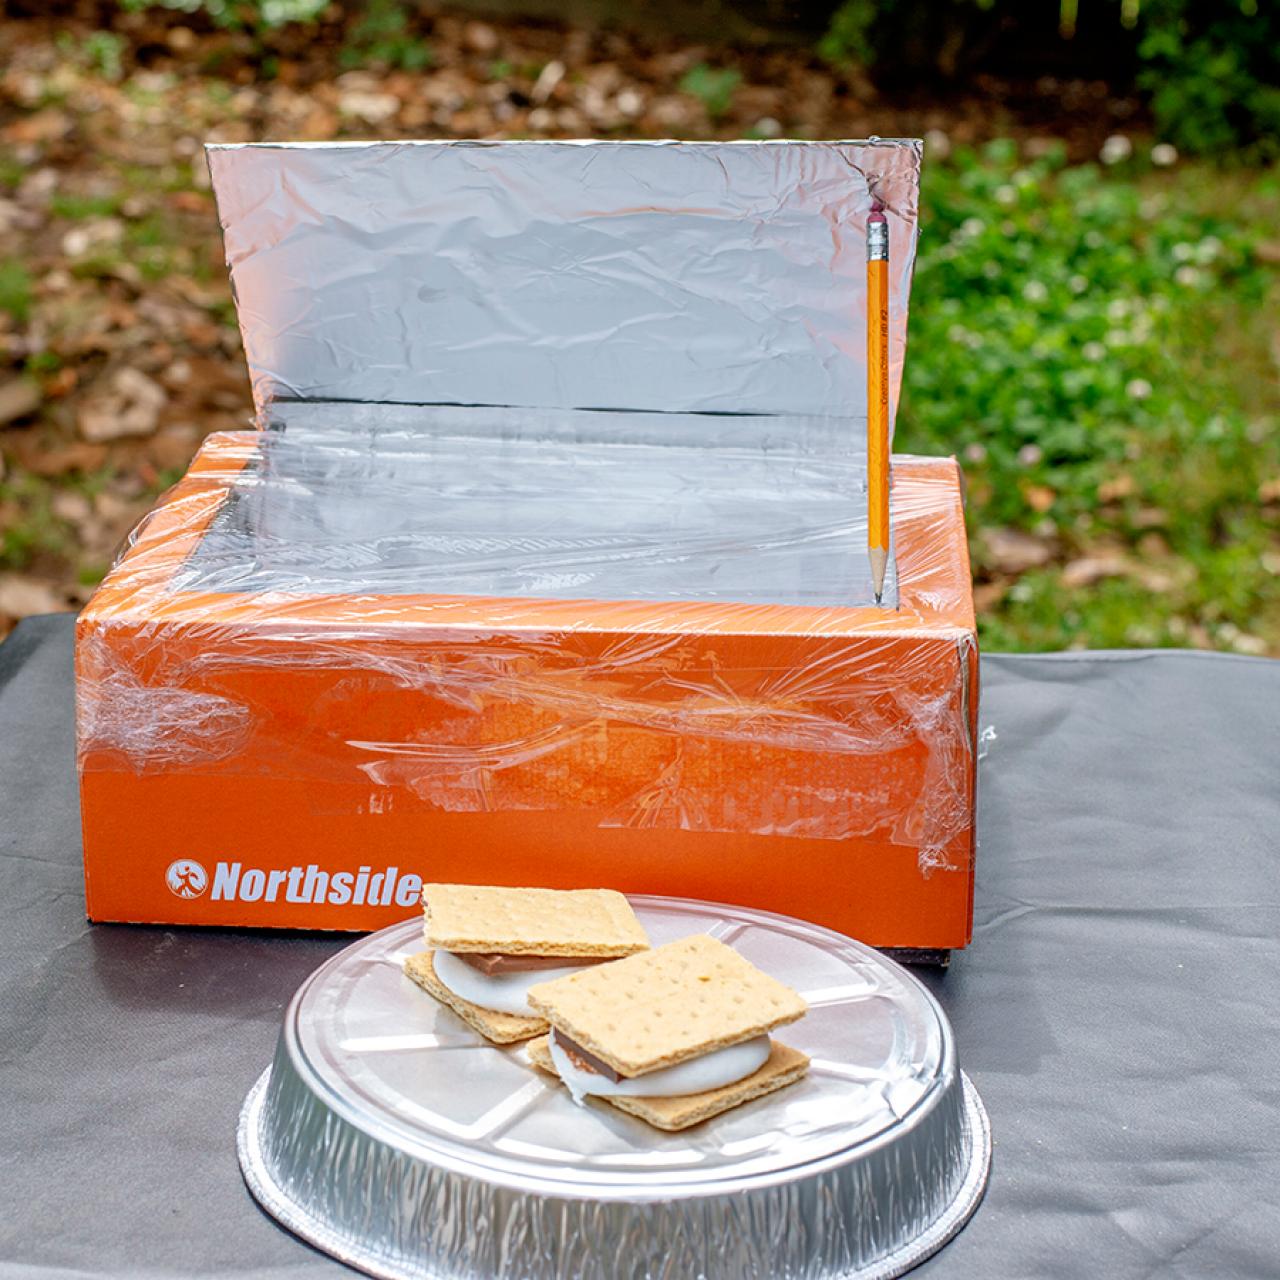 How to Make a Solar Panel With Aluminum Foil: Step-by-Step Guide to Harnessing Solar Power